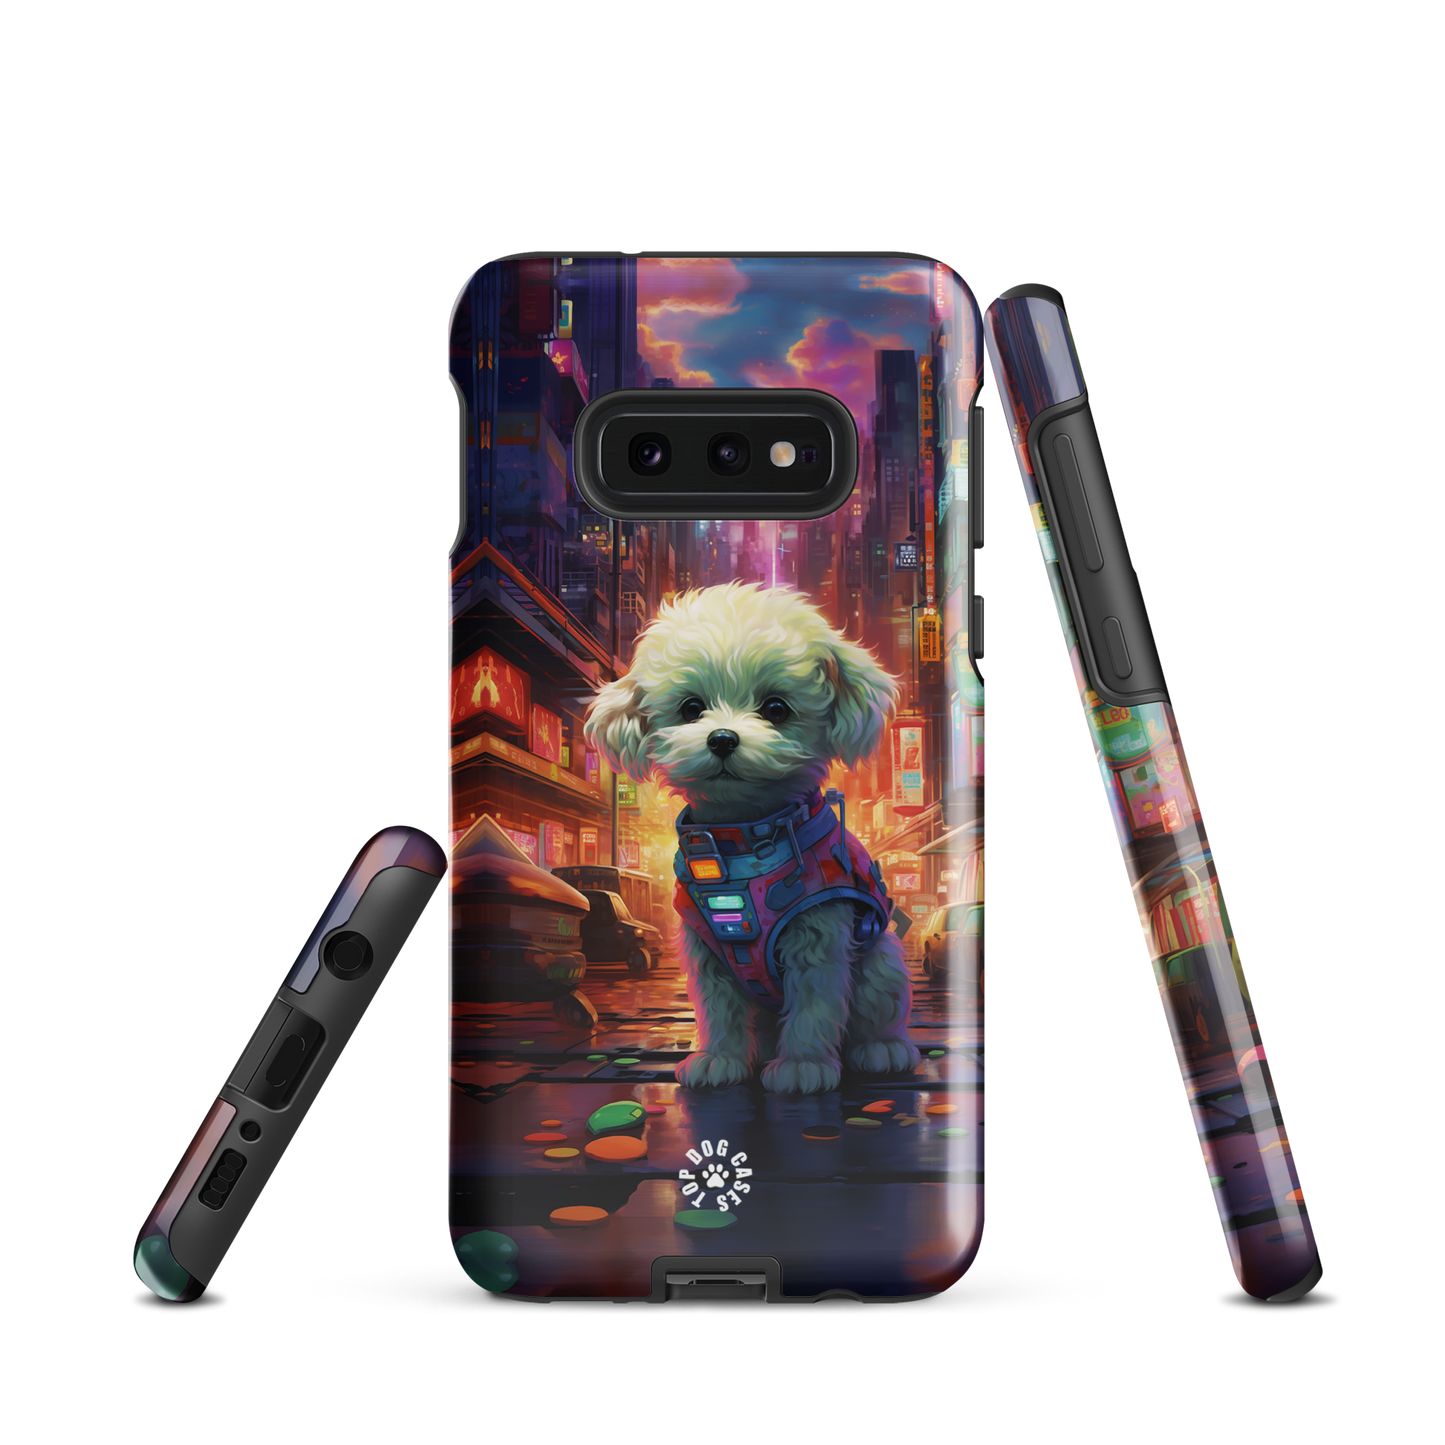 Toy Poodle Samsung Galaxy Case - City Dog - Top Dog Cases - #CityDogs, #CuteDogs, #SamsungGalaxyCase, #SamsungGalaxyS20, #SamsungGalaxyS21, #SamsungGalaxyS22, #SamsungGalaxyS22Ultra, #SamsungGalaxyS23, #SamsungGalaxyS23Ultra, #ToyPoodle